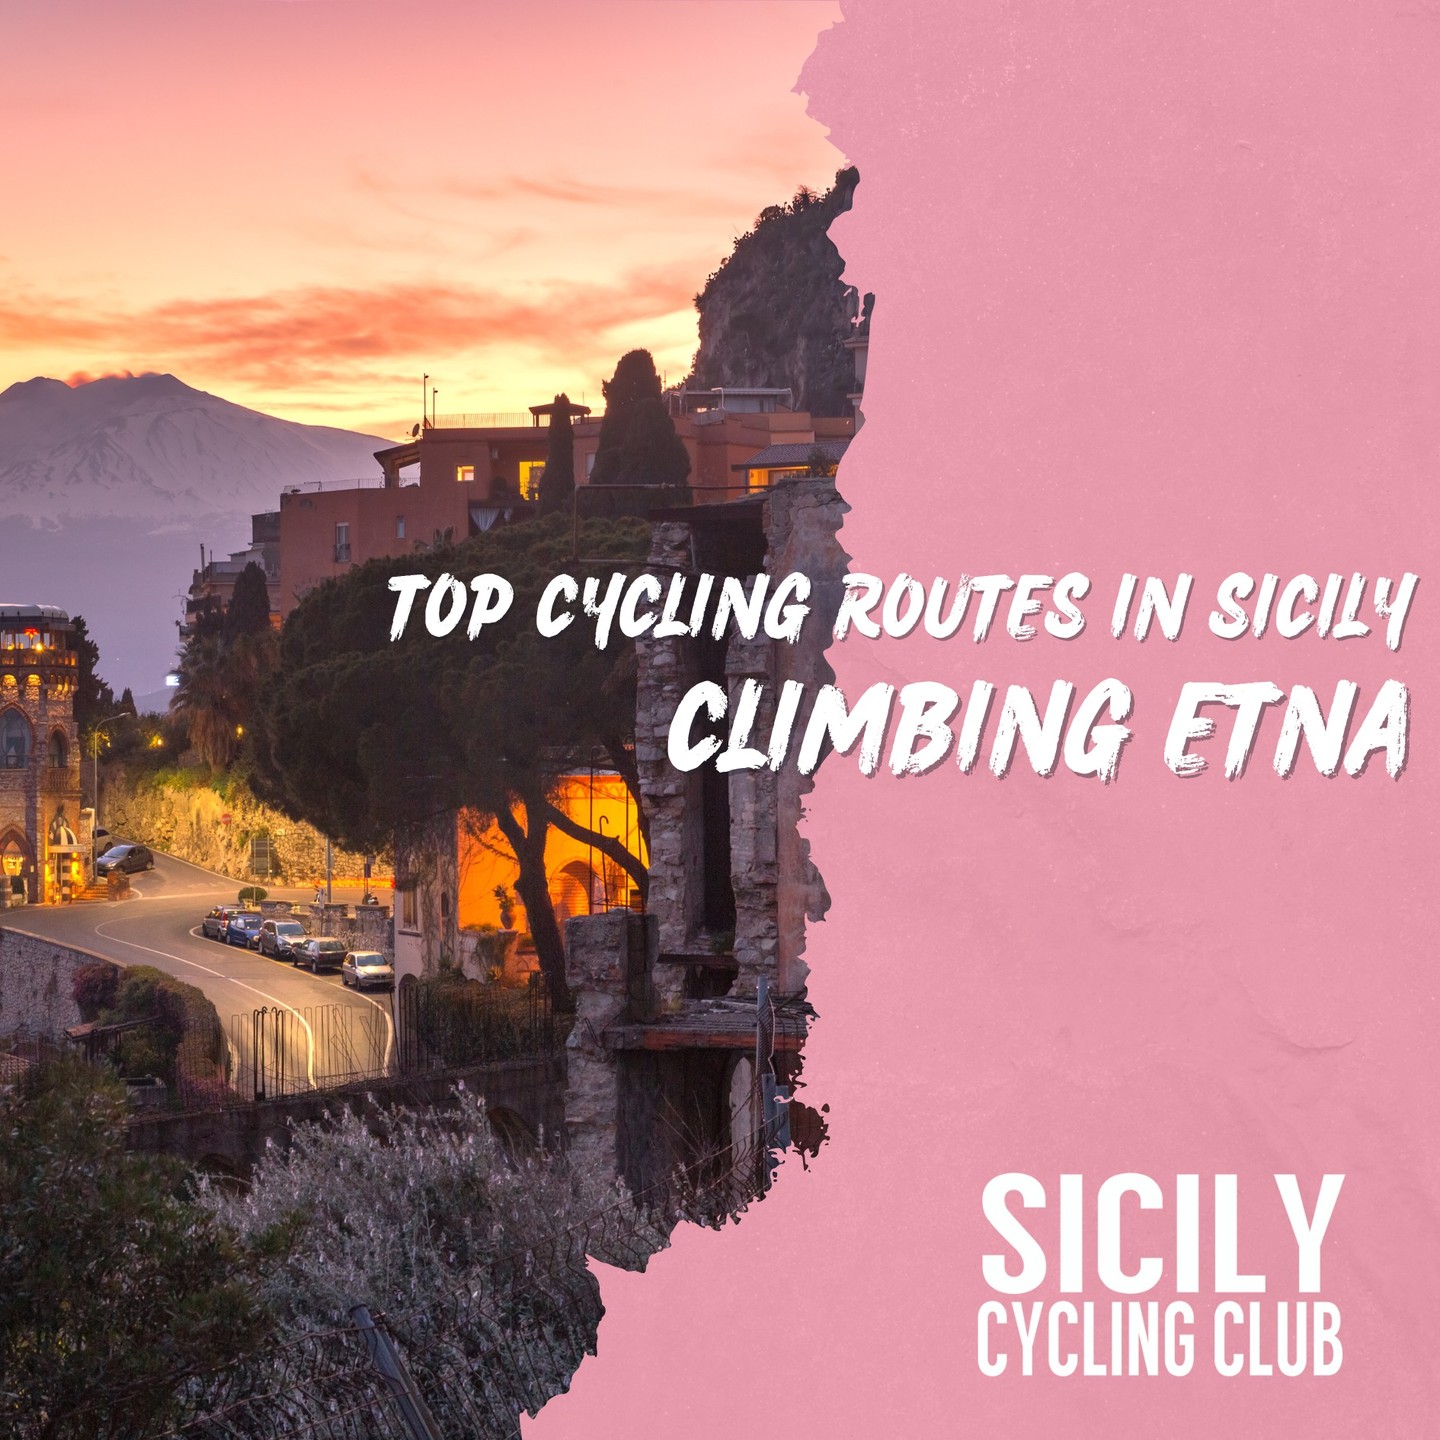 TOP CYCLING ROUTES IN SICILY: Discover everything you need to know about Climbing Etna on a Road Bike. link in bio.

#cyclingetna #etnacycling #roadcyclingitaly #italycycling #sicilycyclingtours #sicilycycling #cyclingsicily